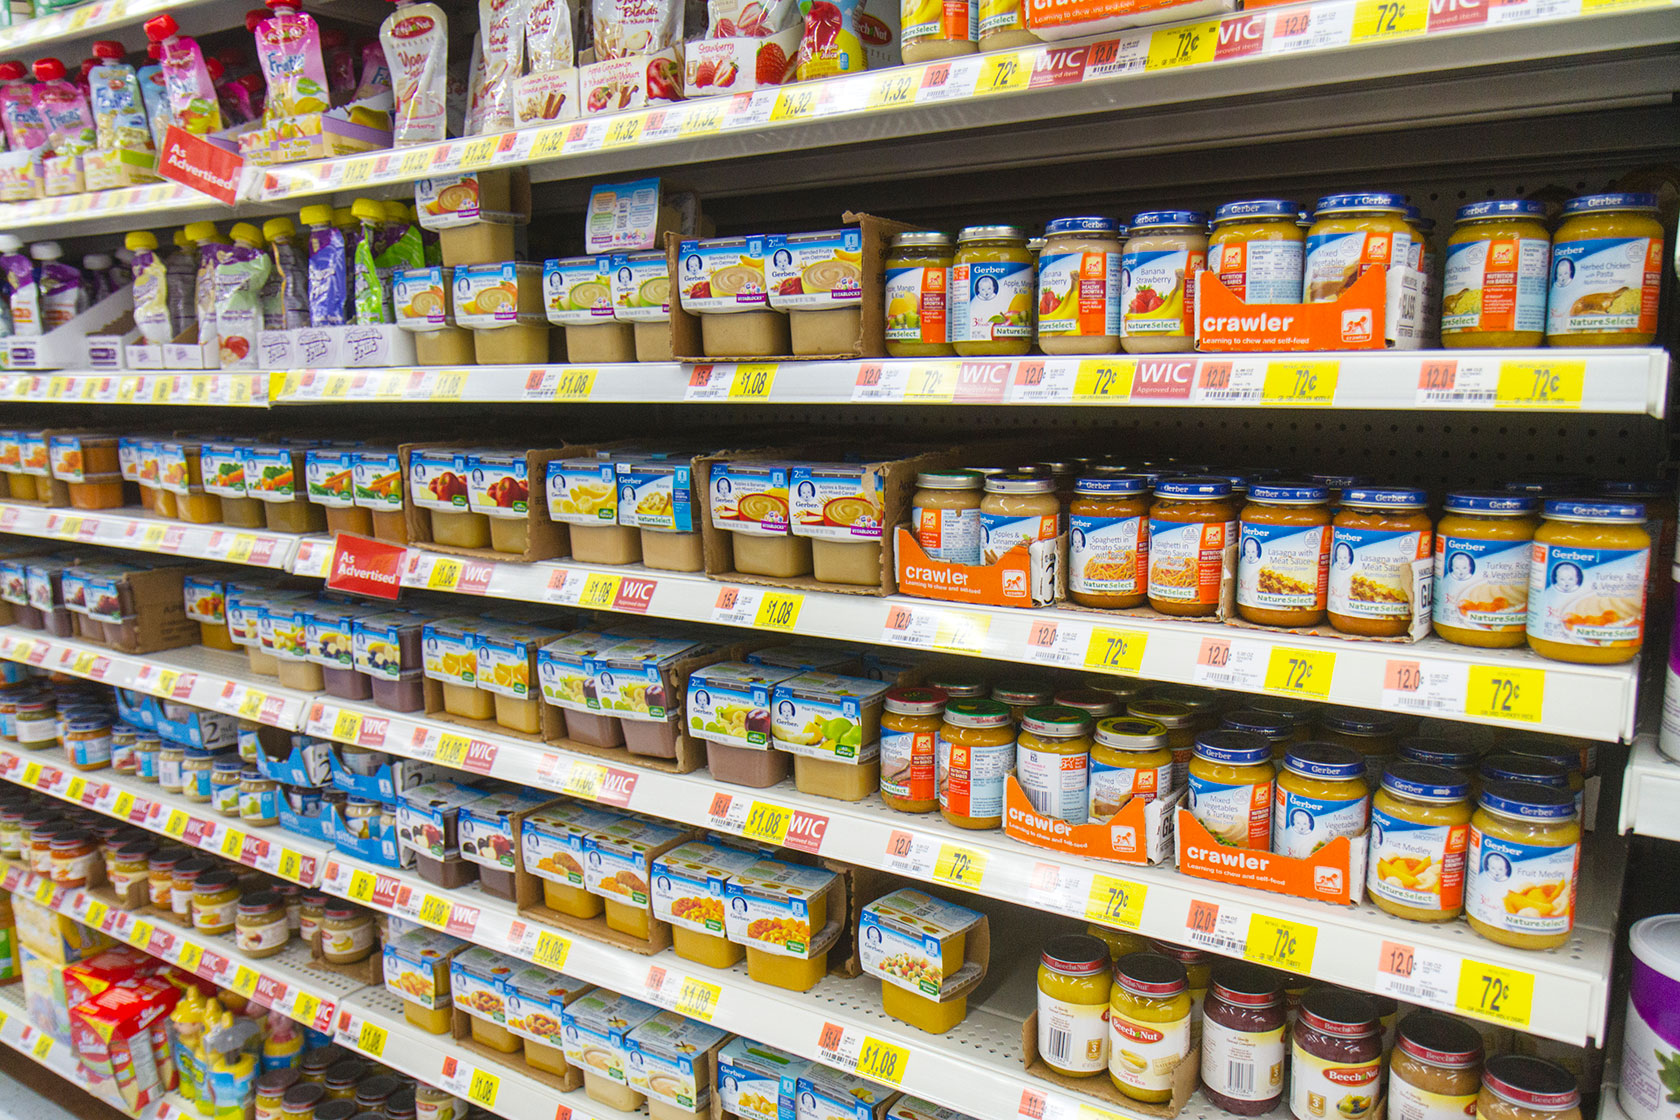 Heavy Metals in Baby Food: Why Did the FDA Find Toxic Metals in